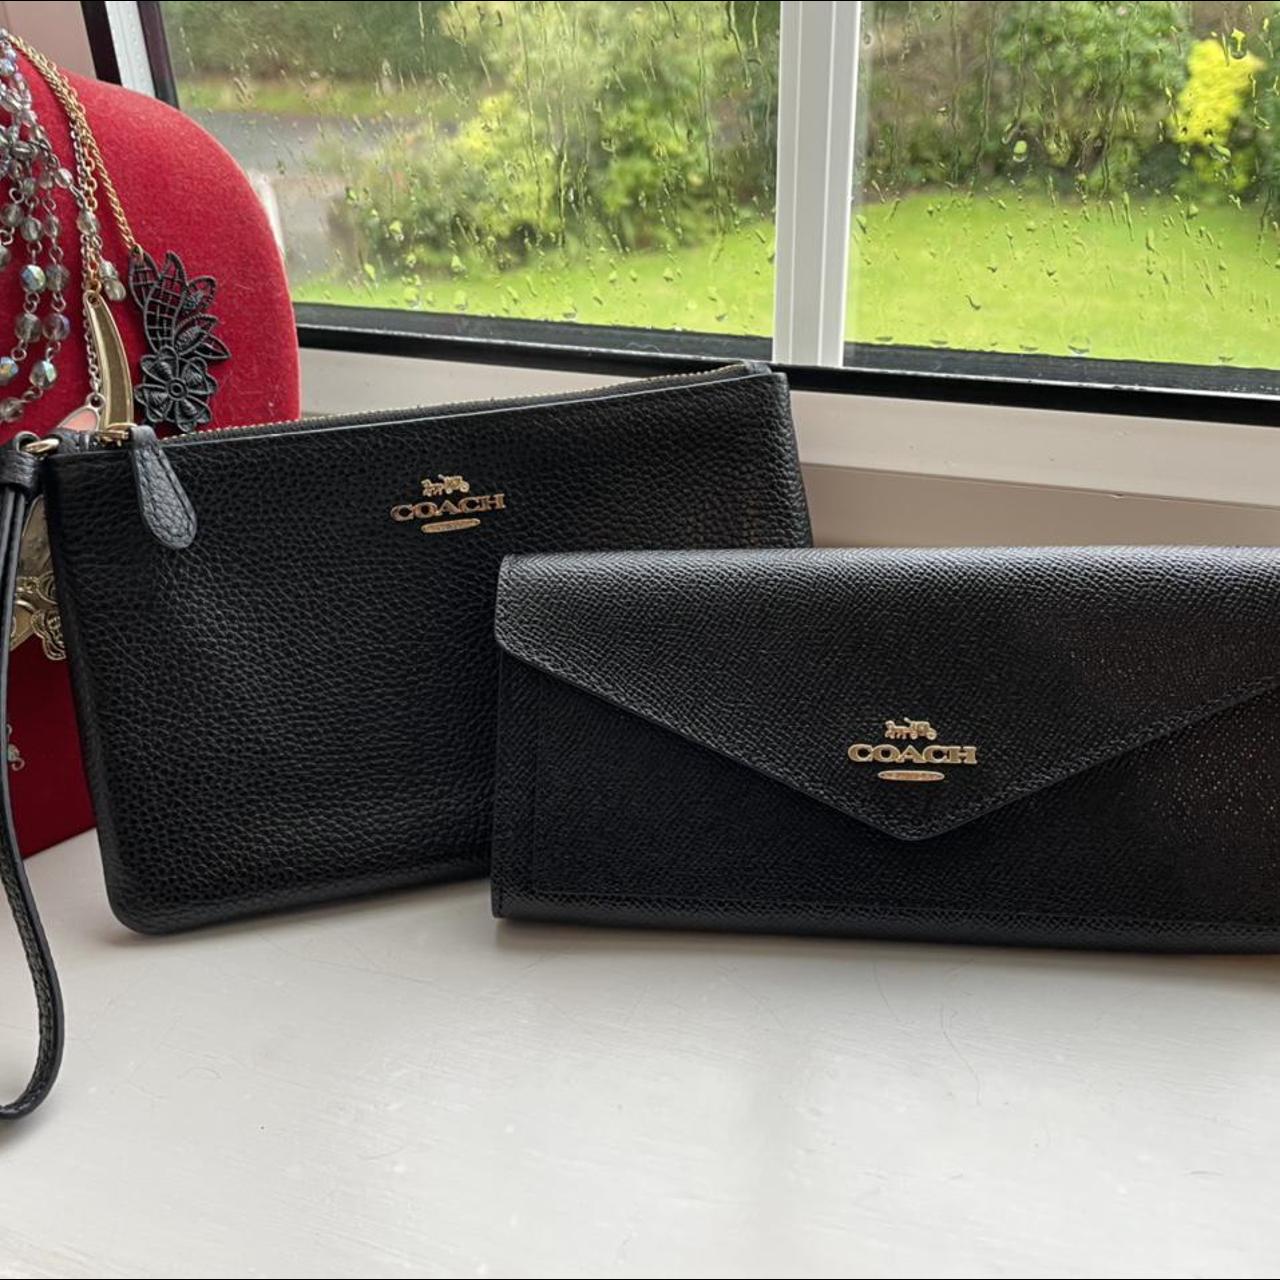 Product Image 4 - Two Coach accessories in black